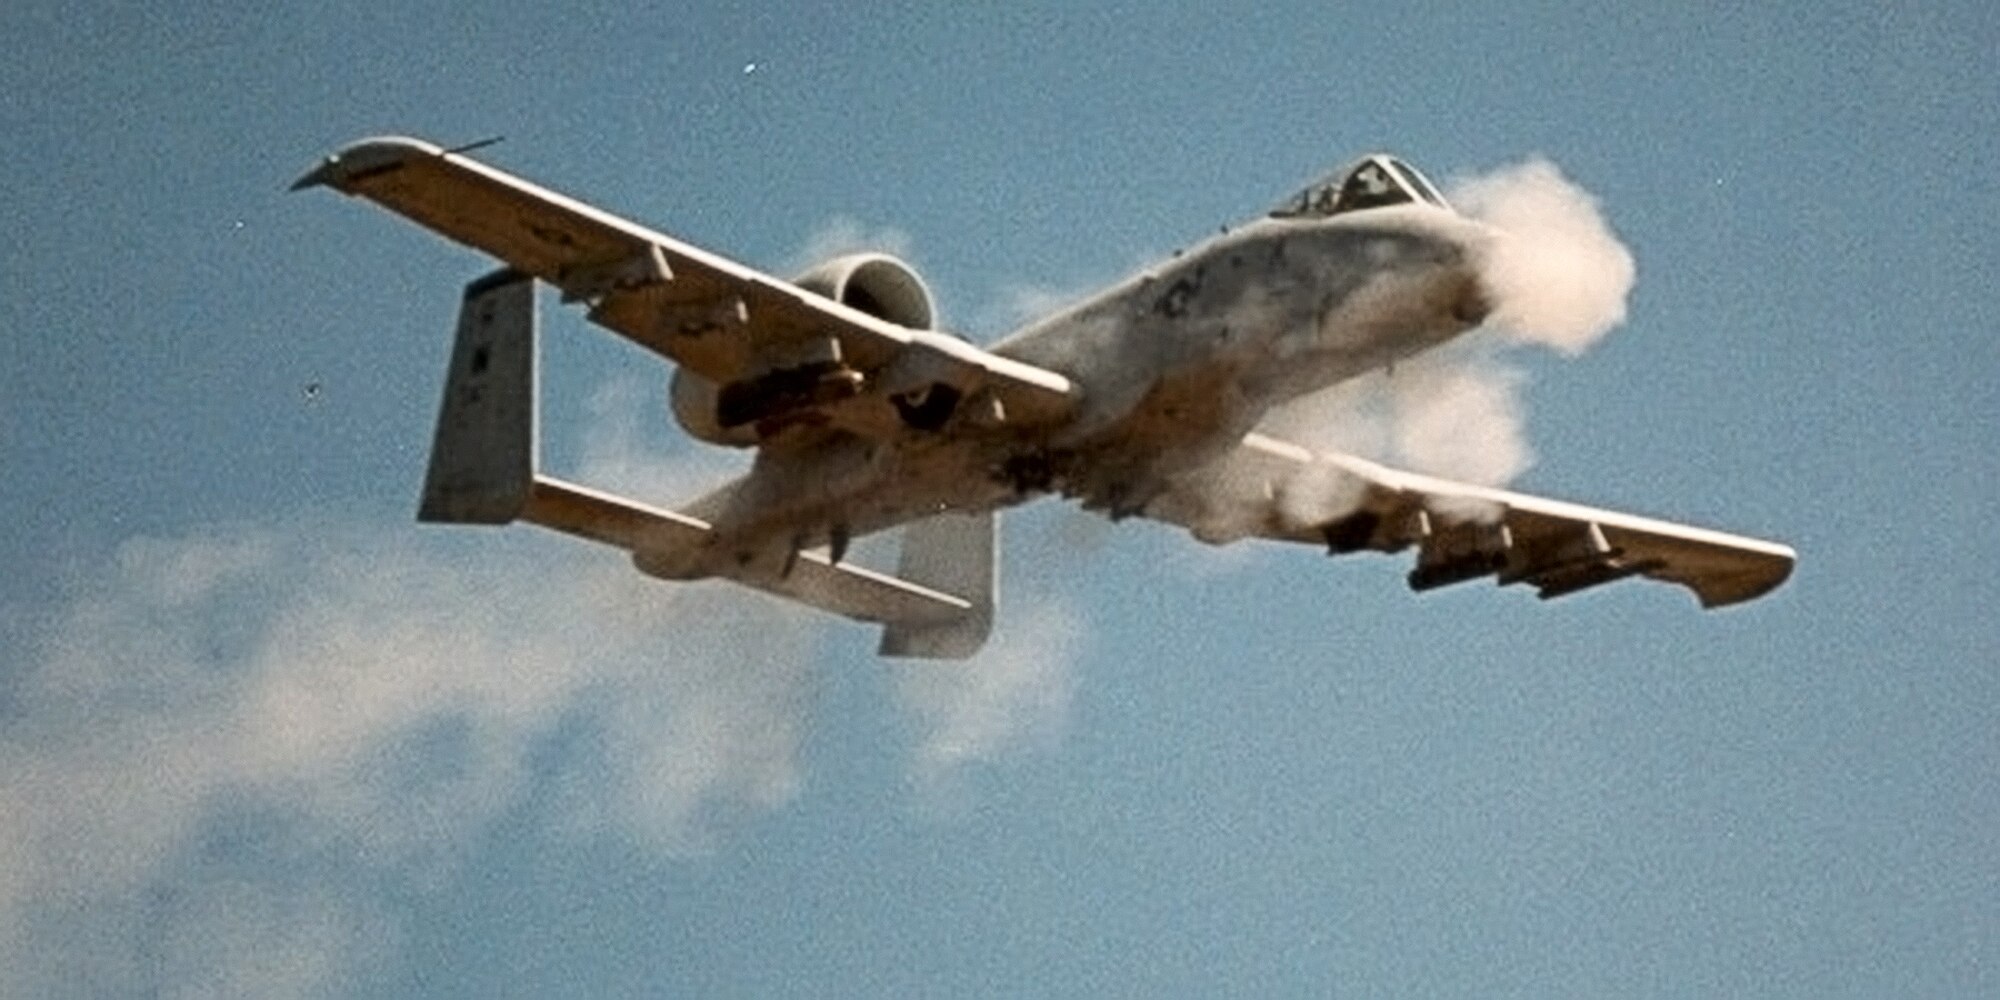 A 930th Tactical Fighter Group A-10 Thunderbolt II fires during a training run at Camp Atterbury, Indiana in 1994. The 434th ARW and the 930th Tactical Fighter Group merged to form the first ever reserve composite wing, consisting of KC-135 and A-10 aircraft.